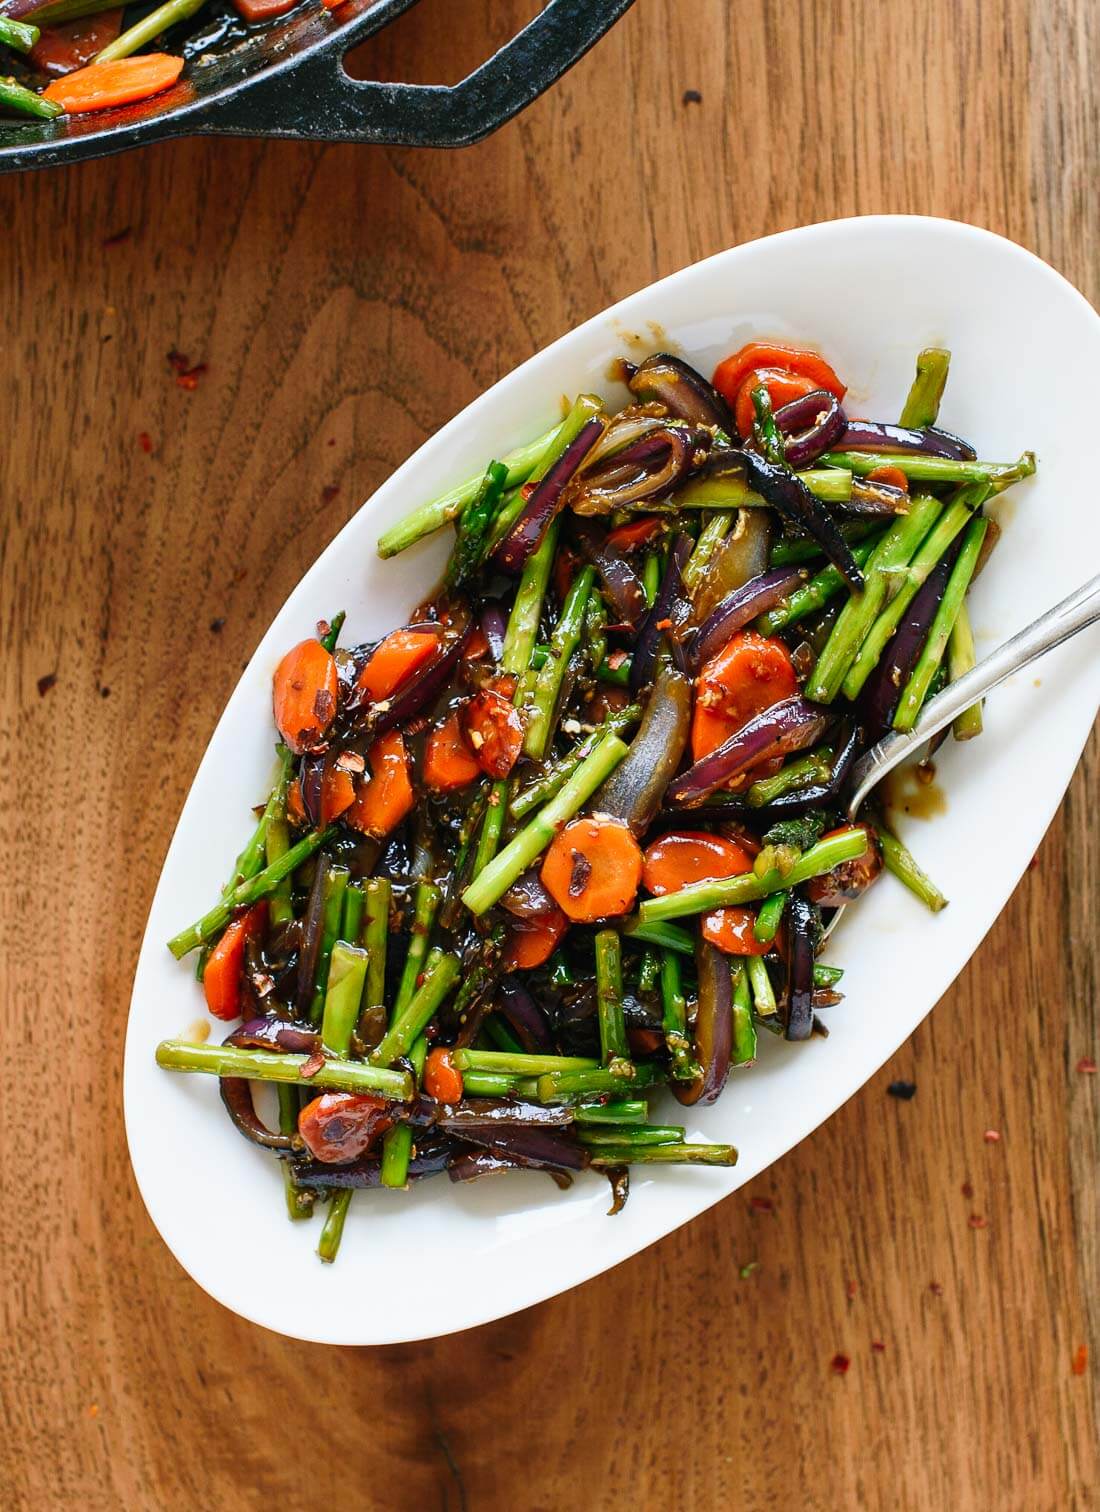 This spring vegetable stir-fry is fresh and full of flavor! Vegetarian; easily vegan and gluten free.